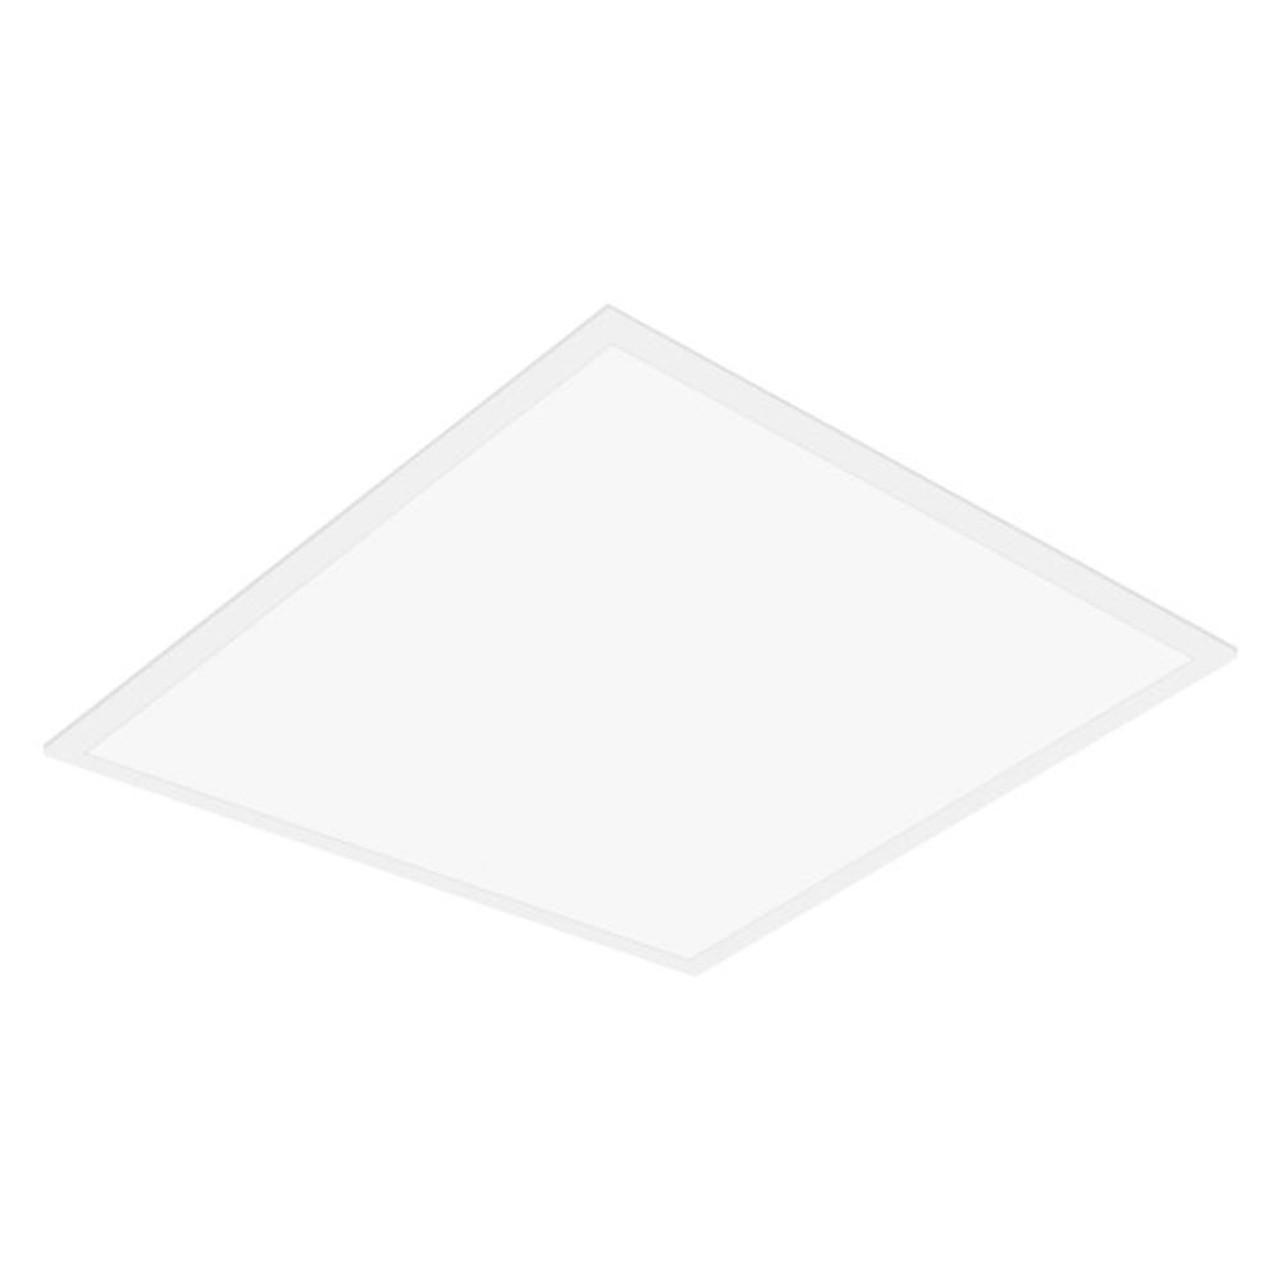 Ledvance LED Compact Value Panel 600mm X 600mm 33W Cool White 3600lm